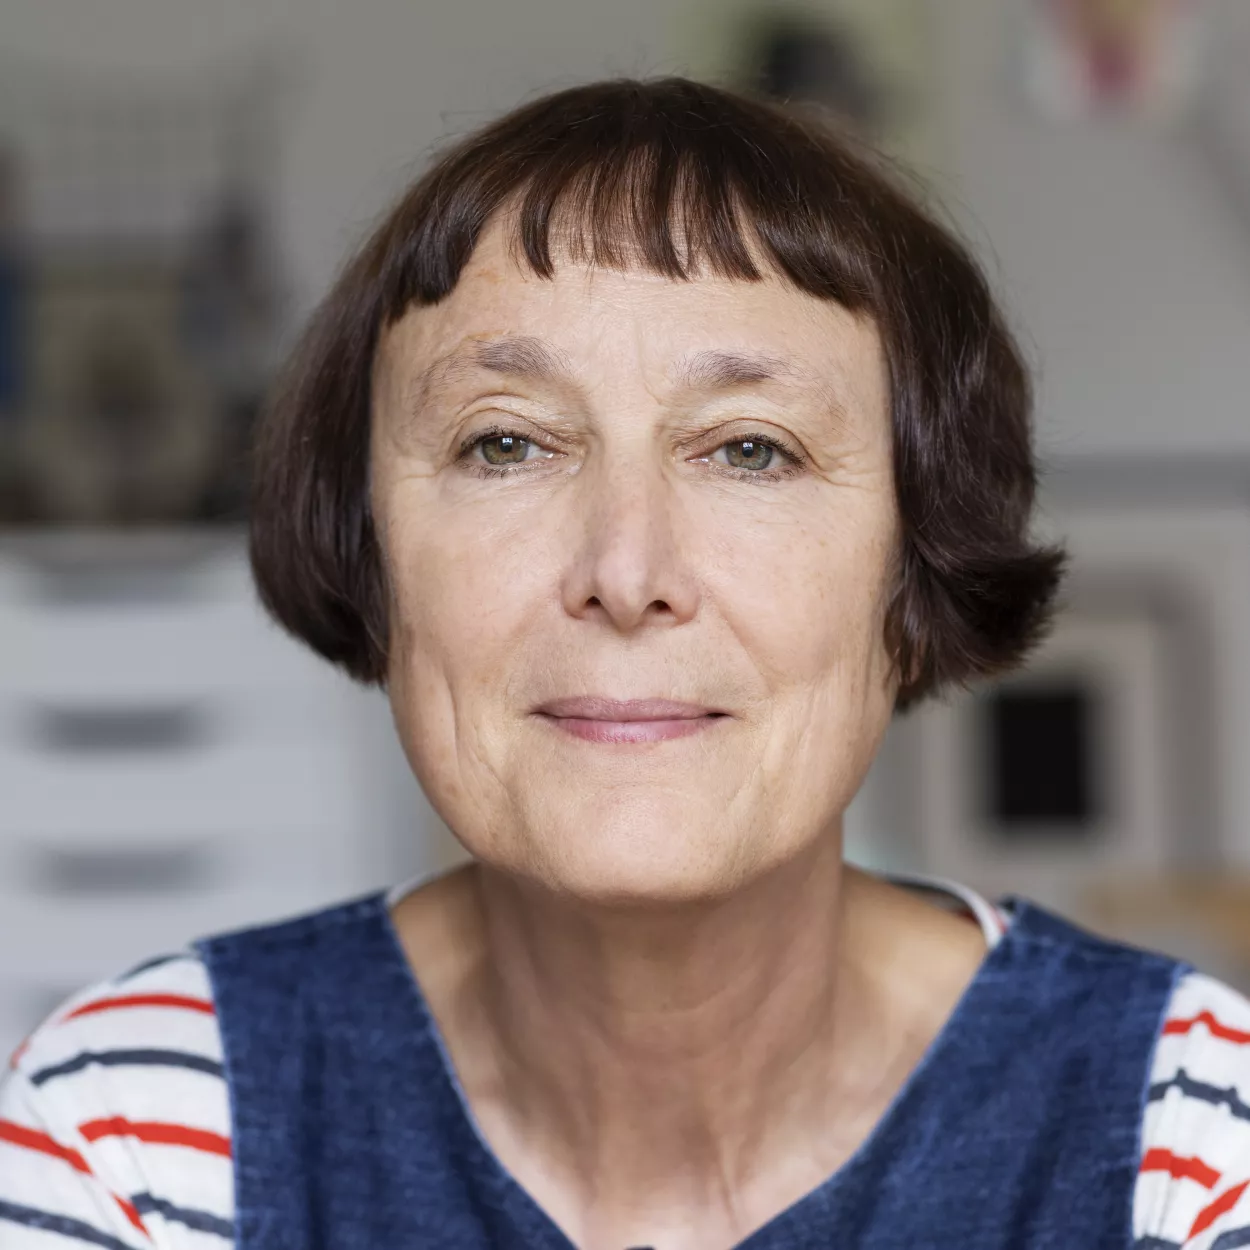 Cornelia Parker is wearing a stripy top and blue overall.